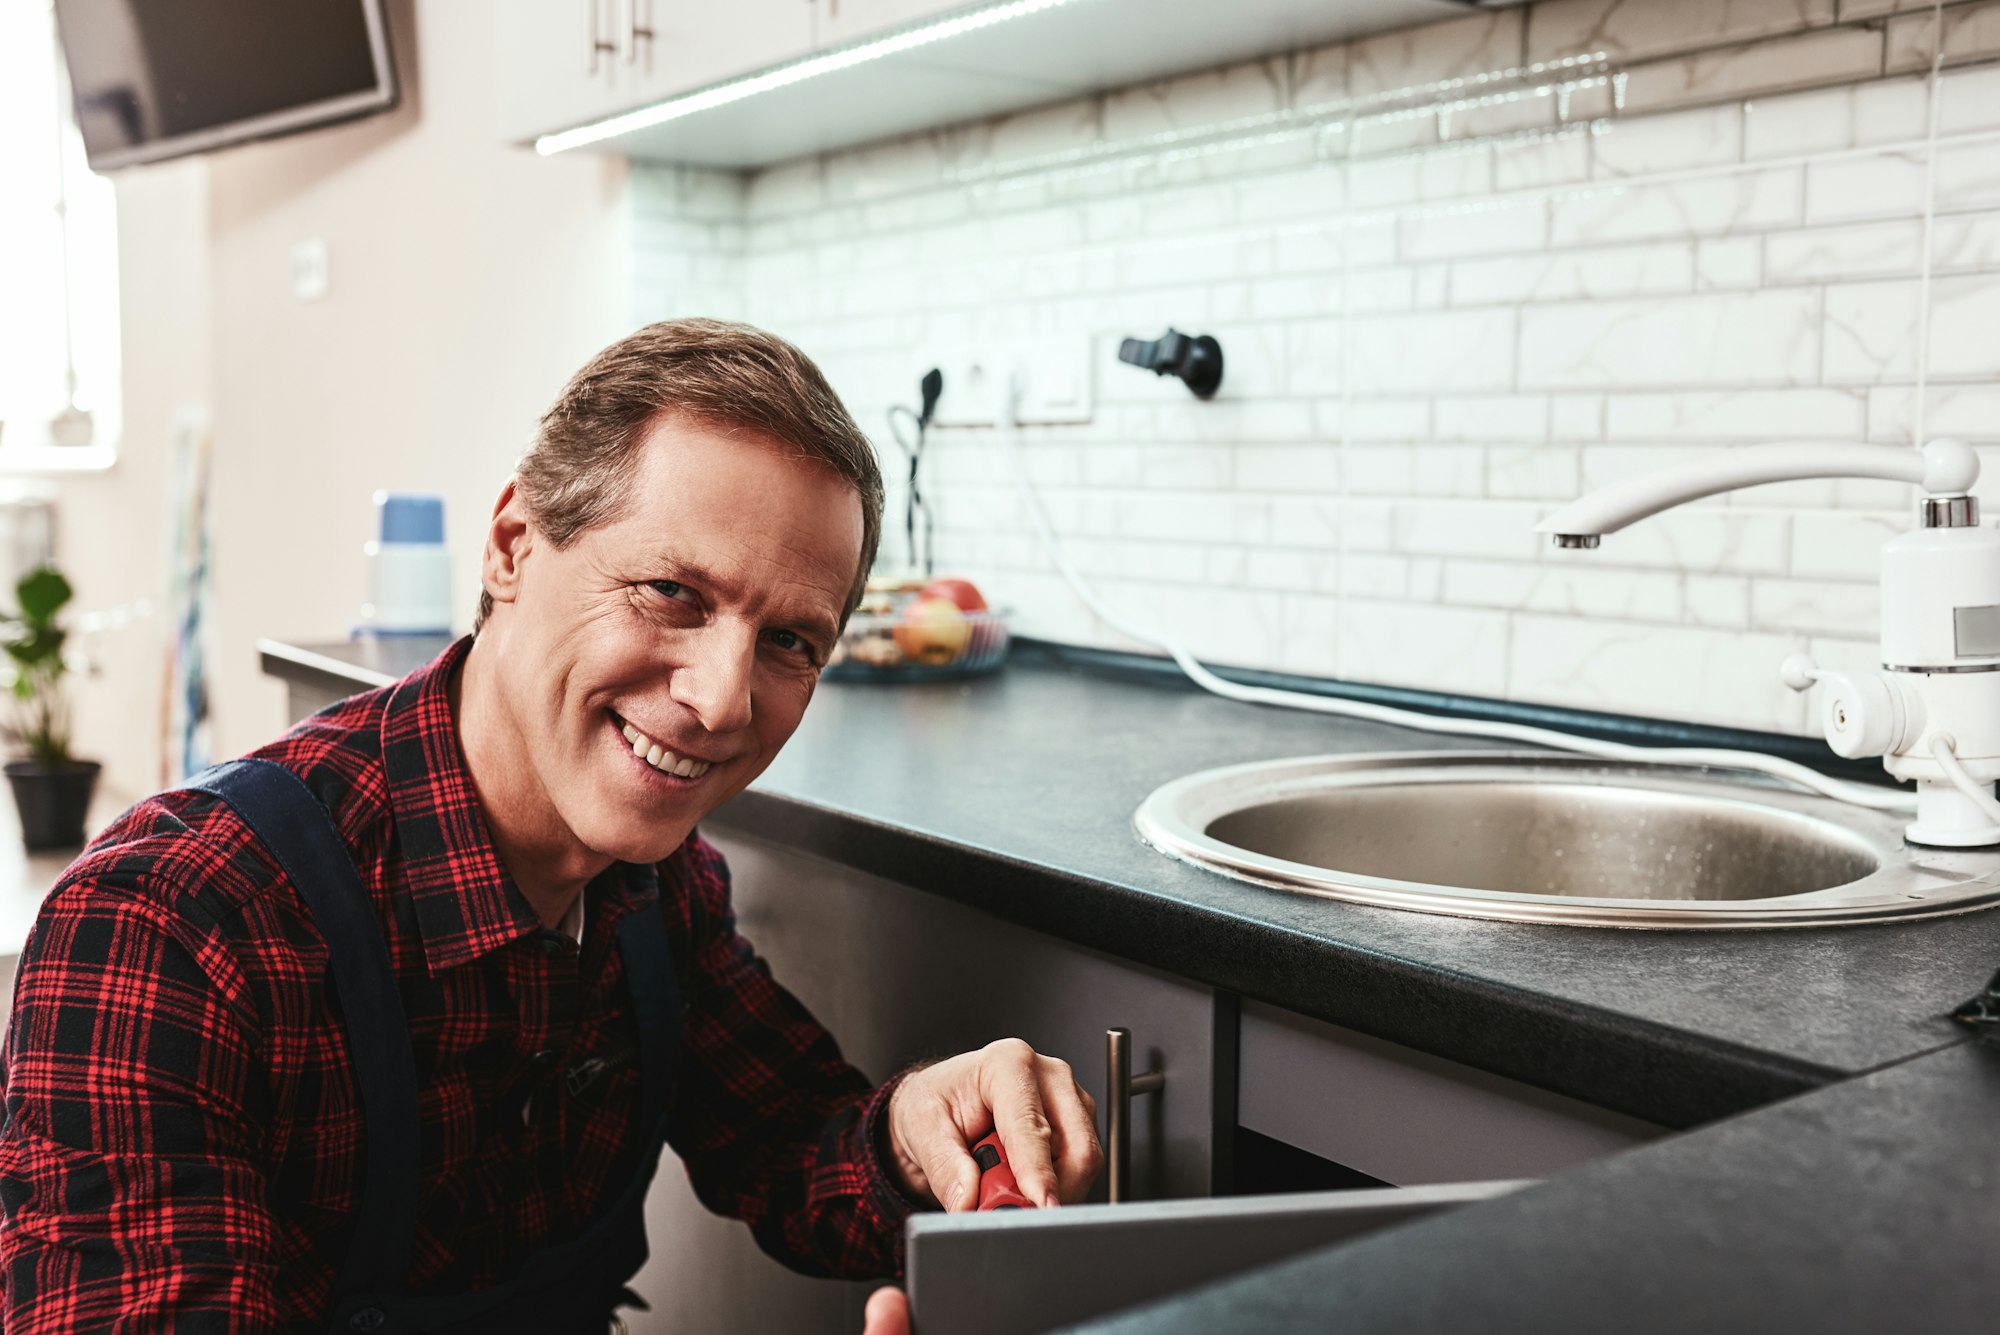 Handyman repairing a sink and smiling, metaphor for the restorative and reliable LANAP gum treatment at Schlueter Periodontics.